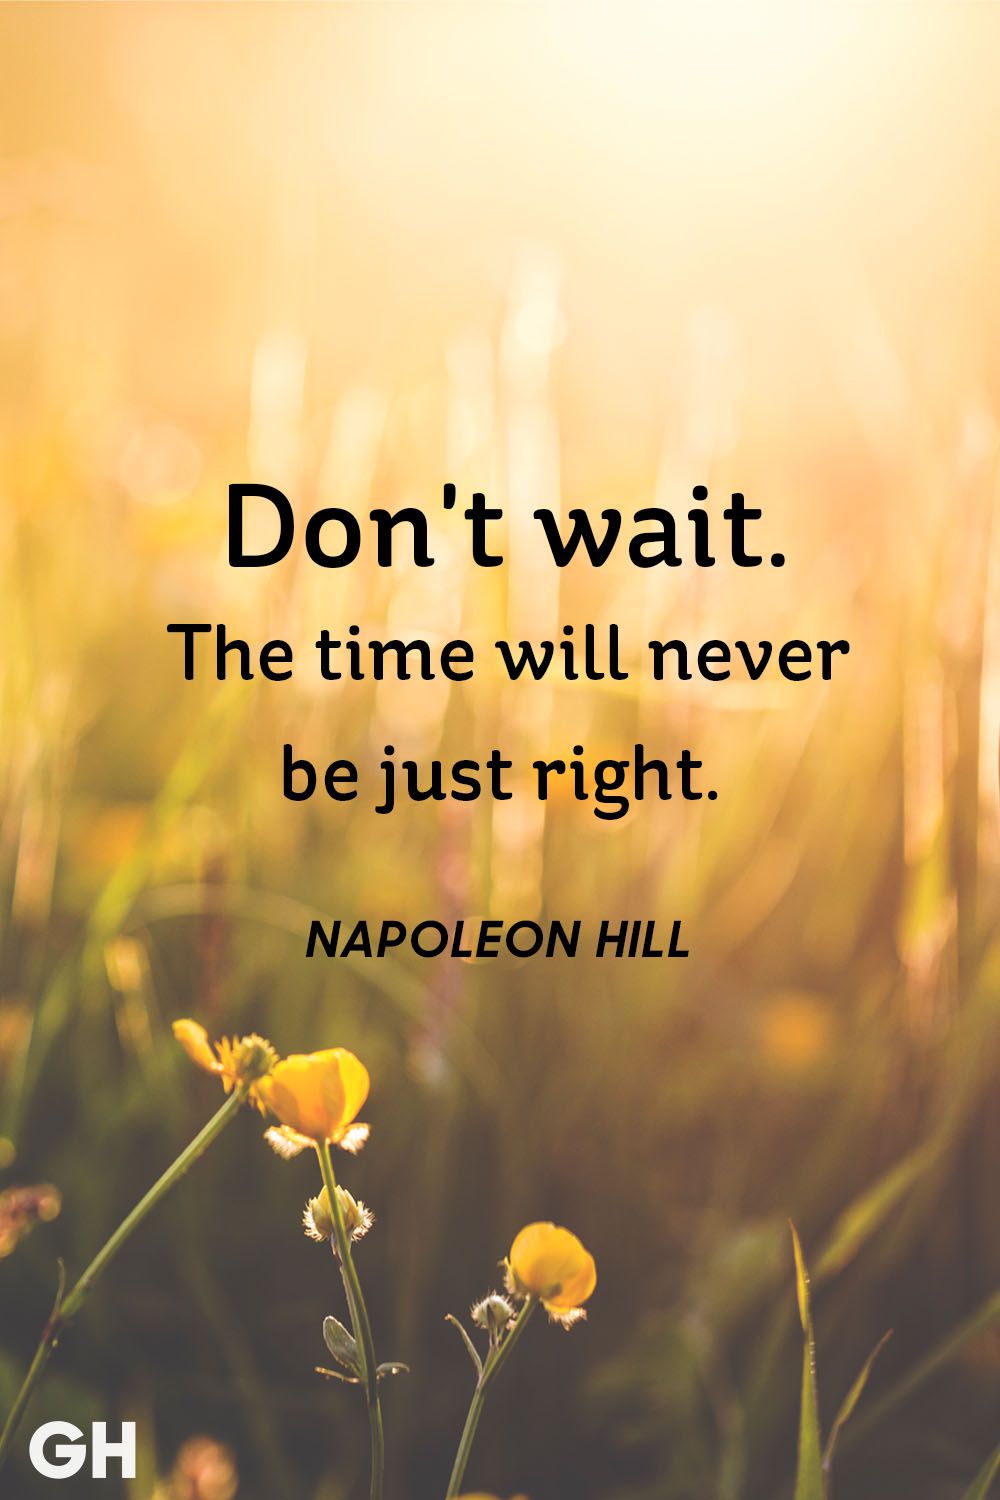 Don’t wait the time will never be just right. Napoleon hill